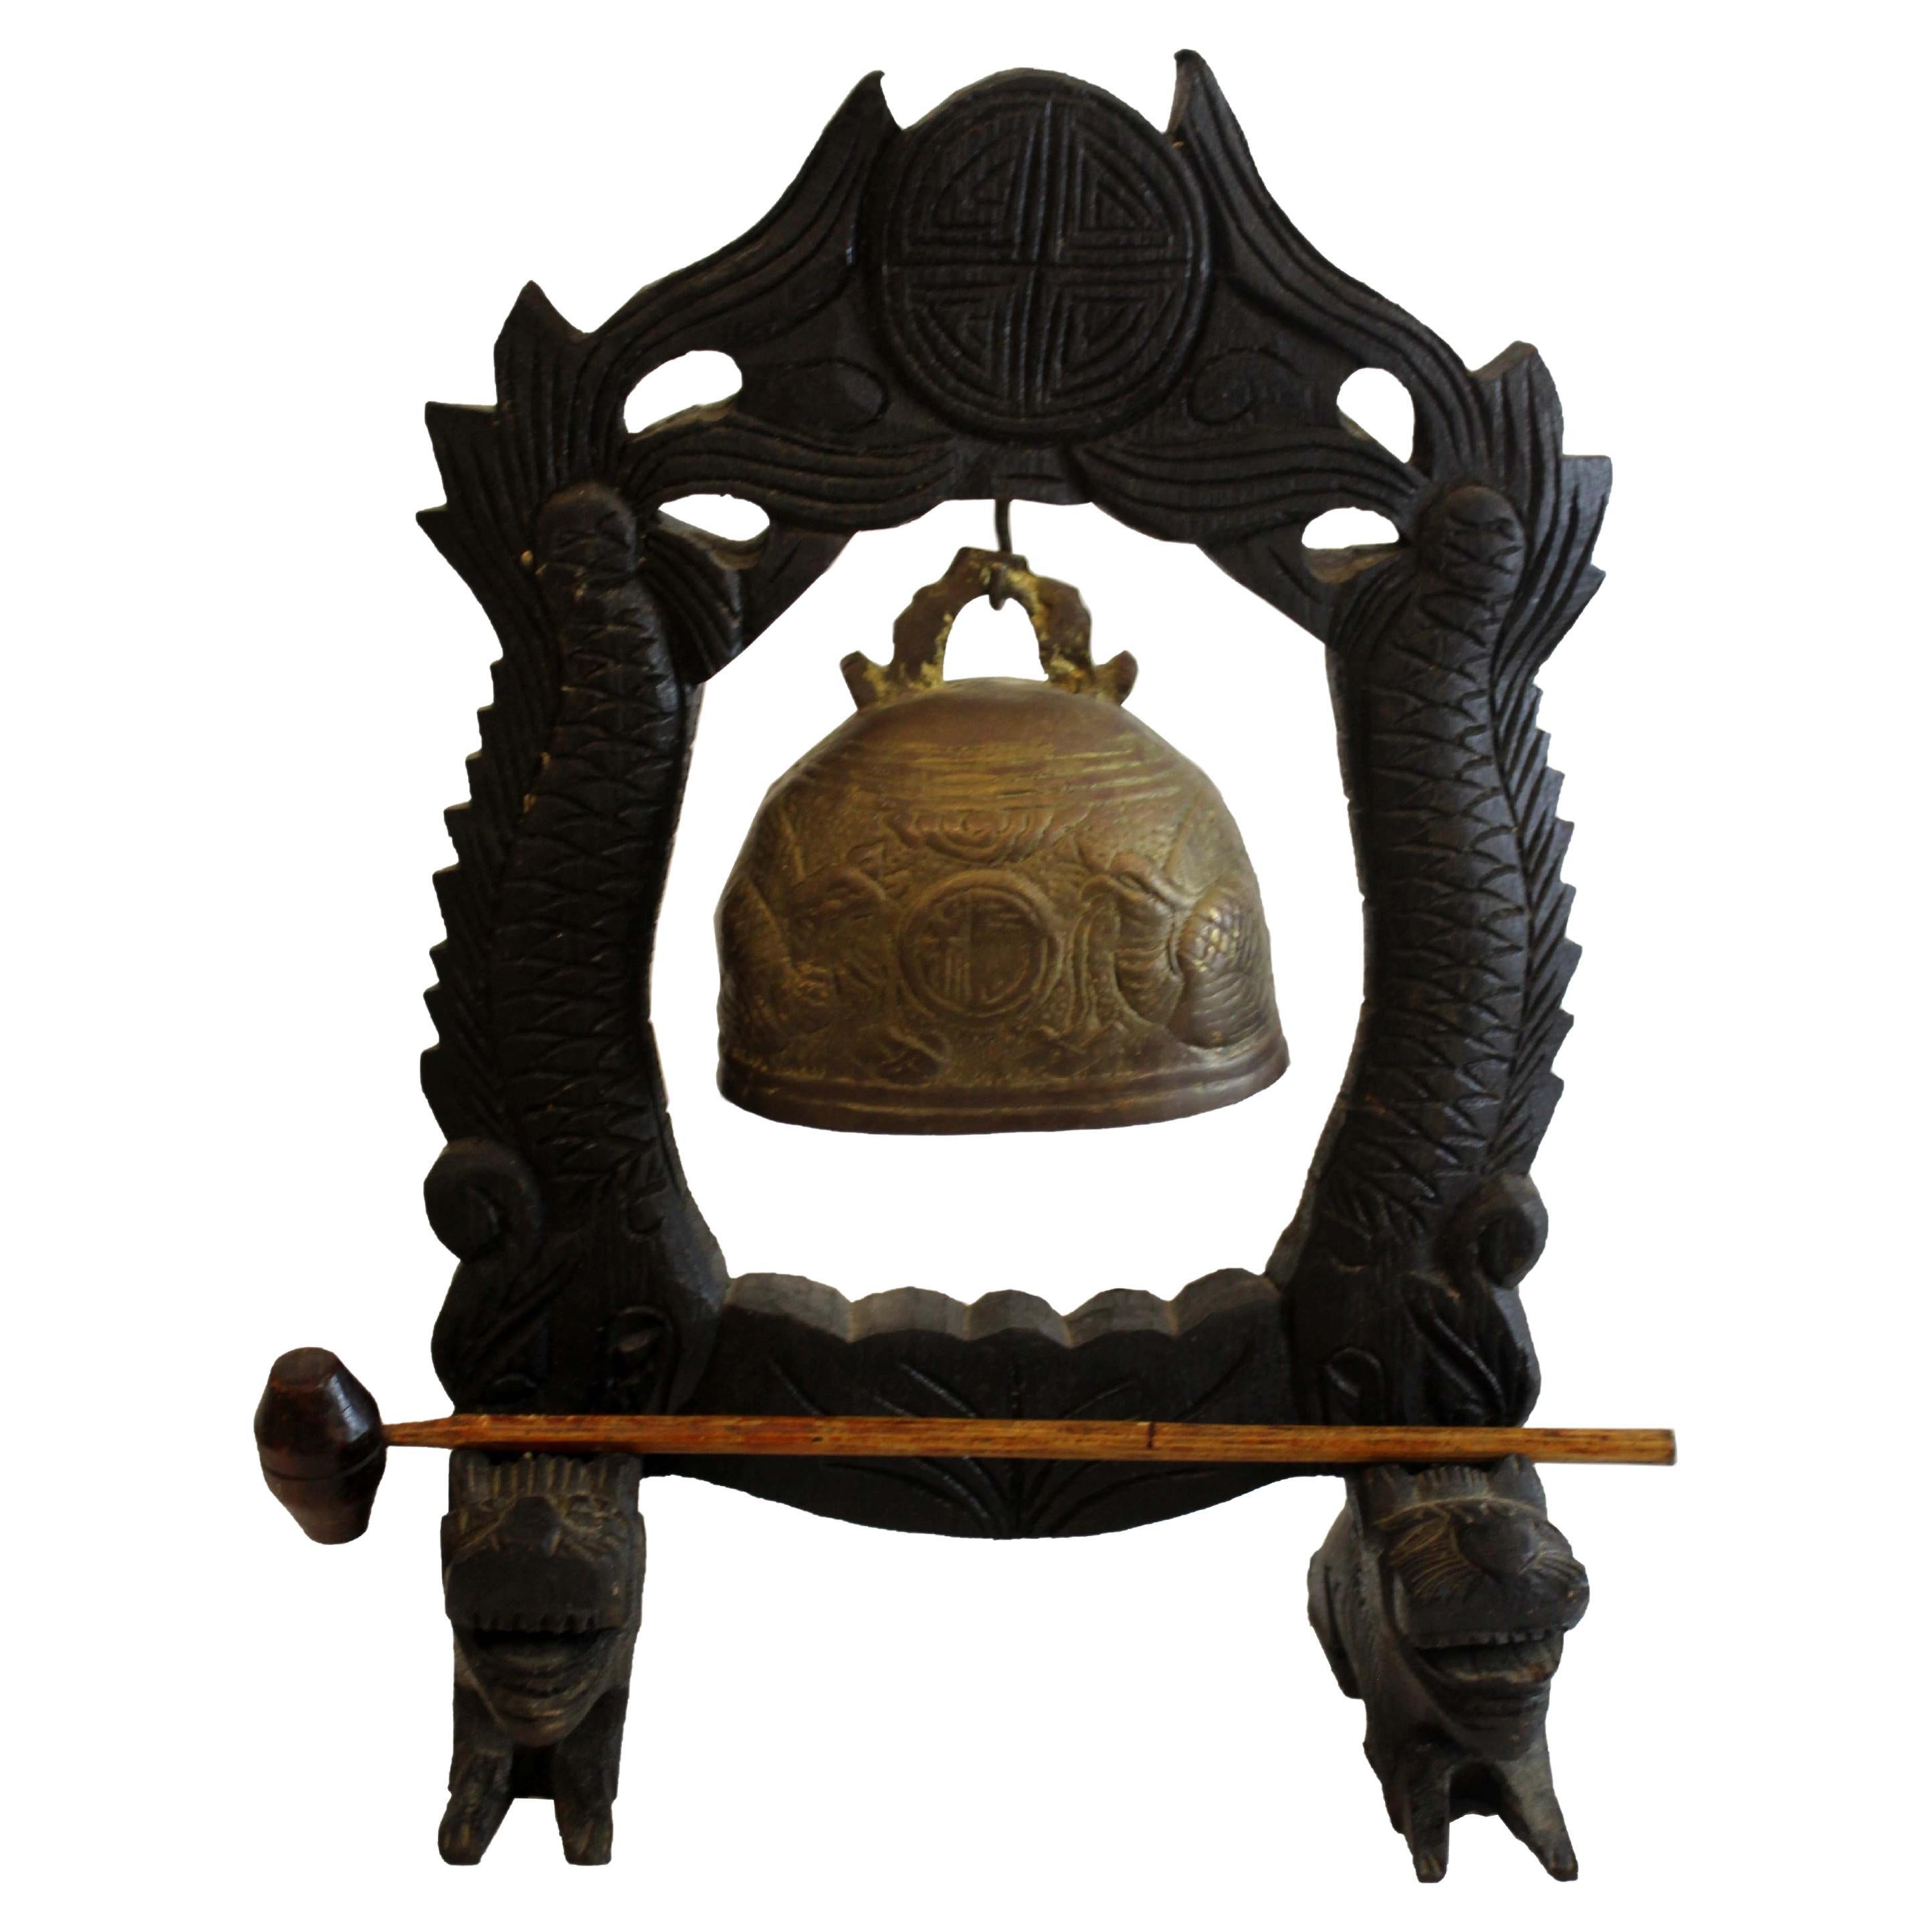 Brass Gong - 17 For Sale on 1stDibs | brass gong on stand, antique gong,  vintage brass dinner gong